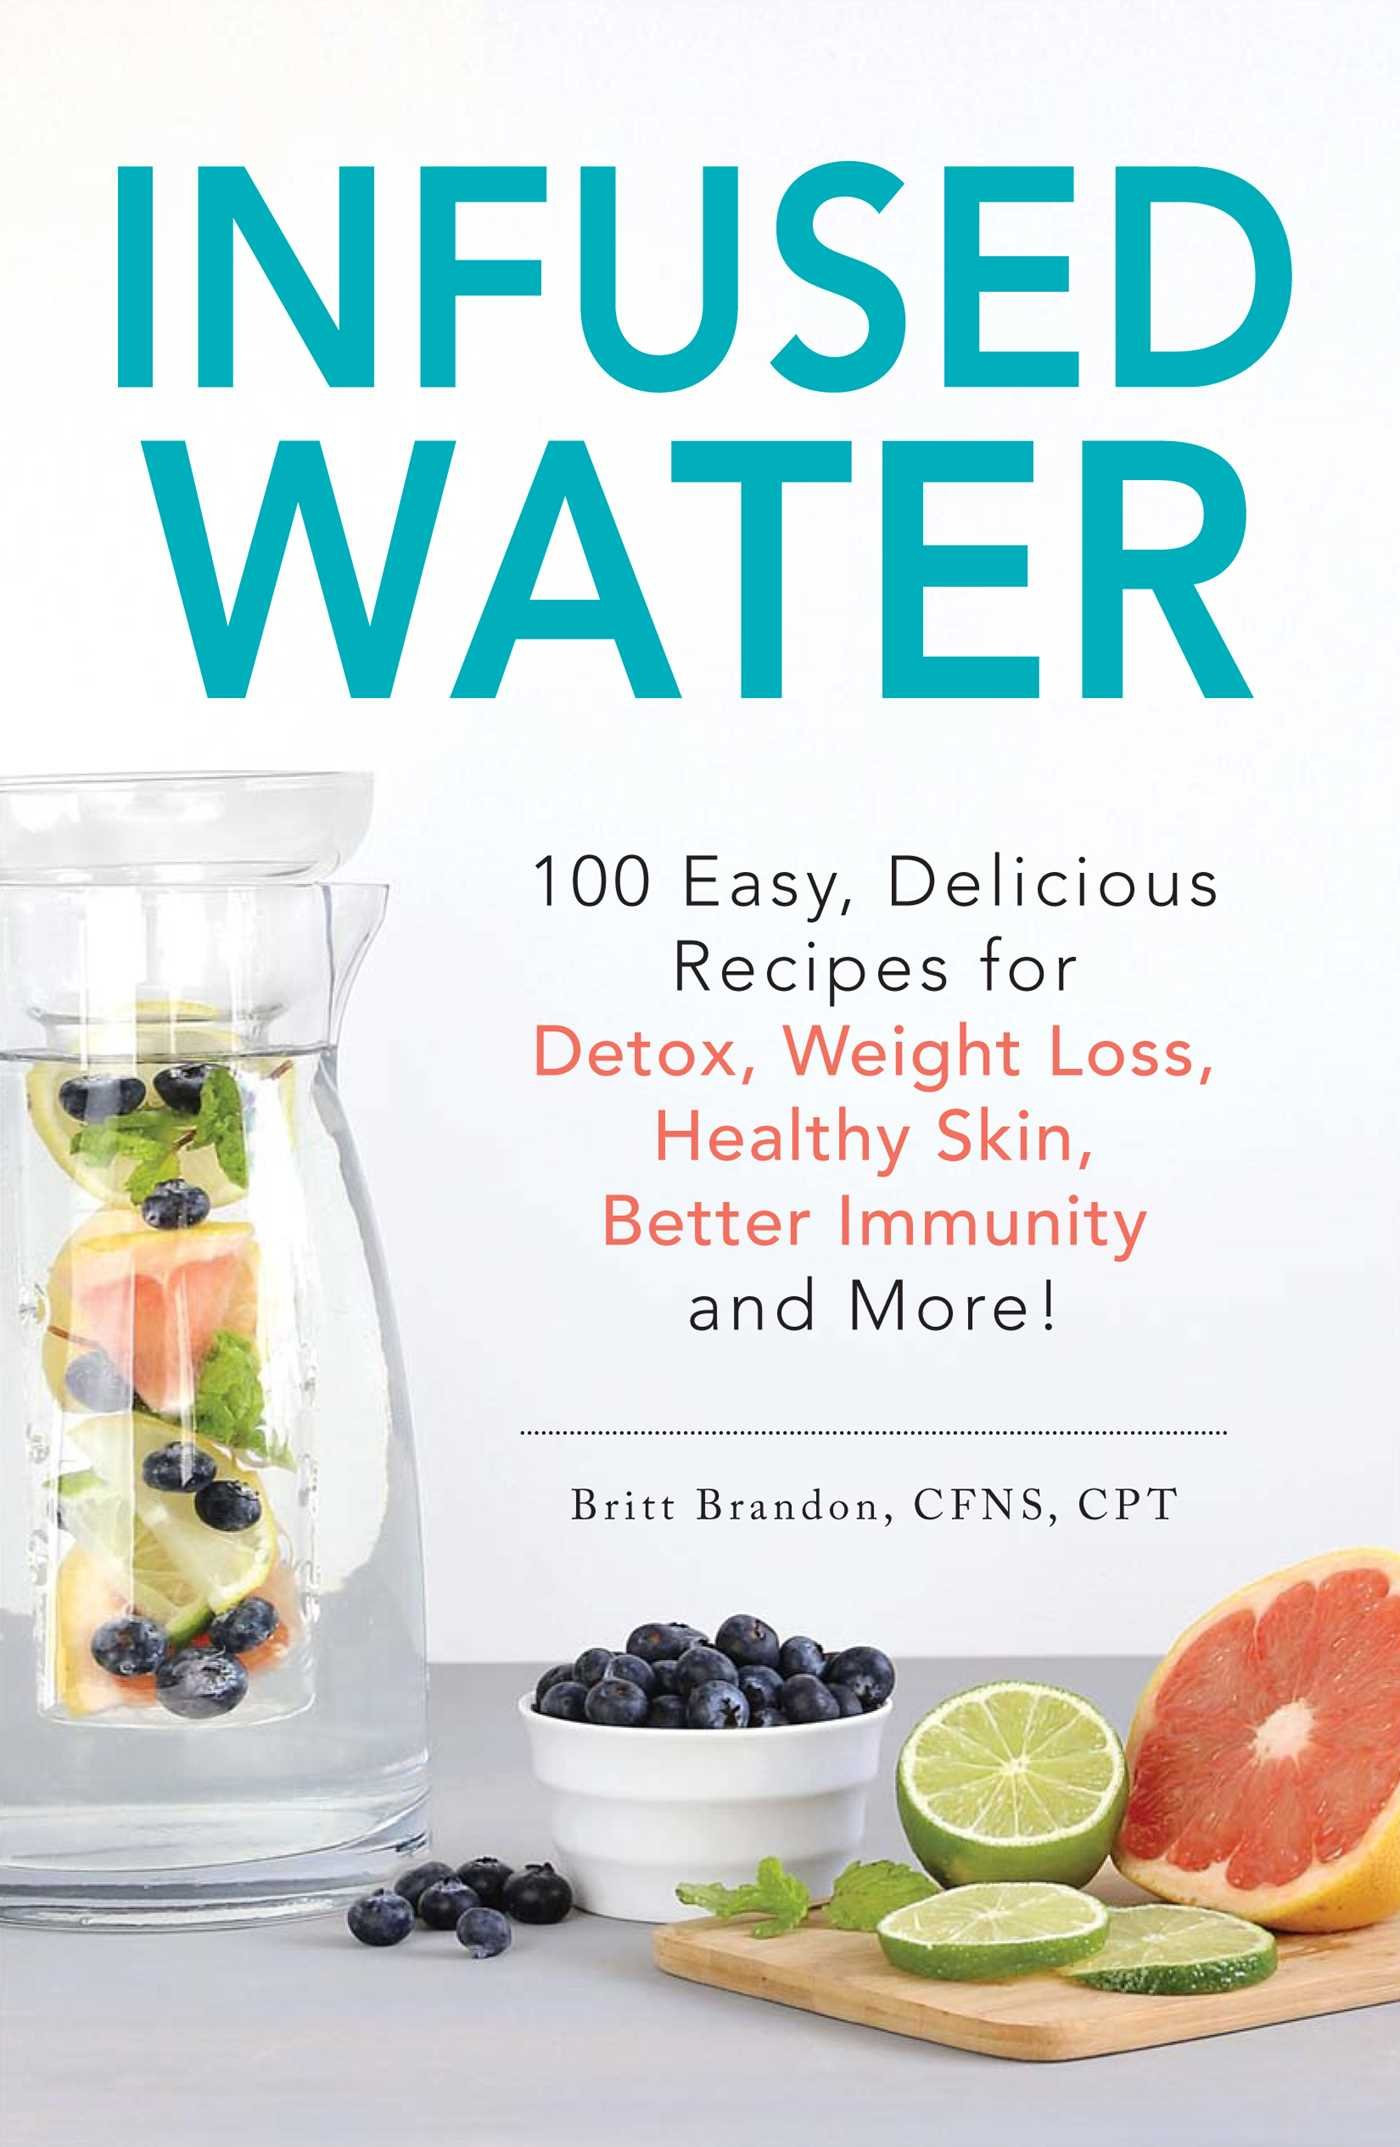 Infused Water Recipes For Weight Loss
 infused water for weight loss